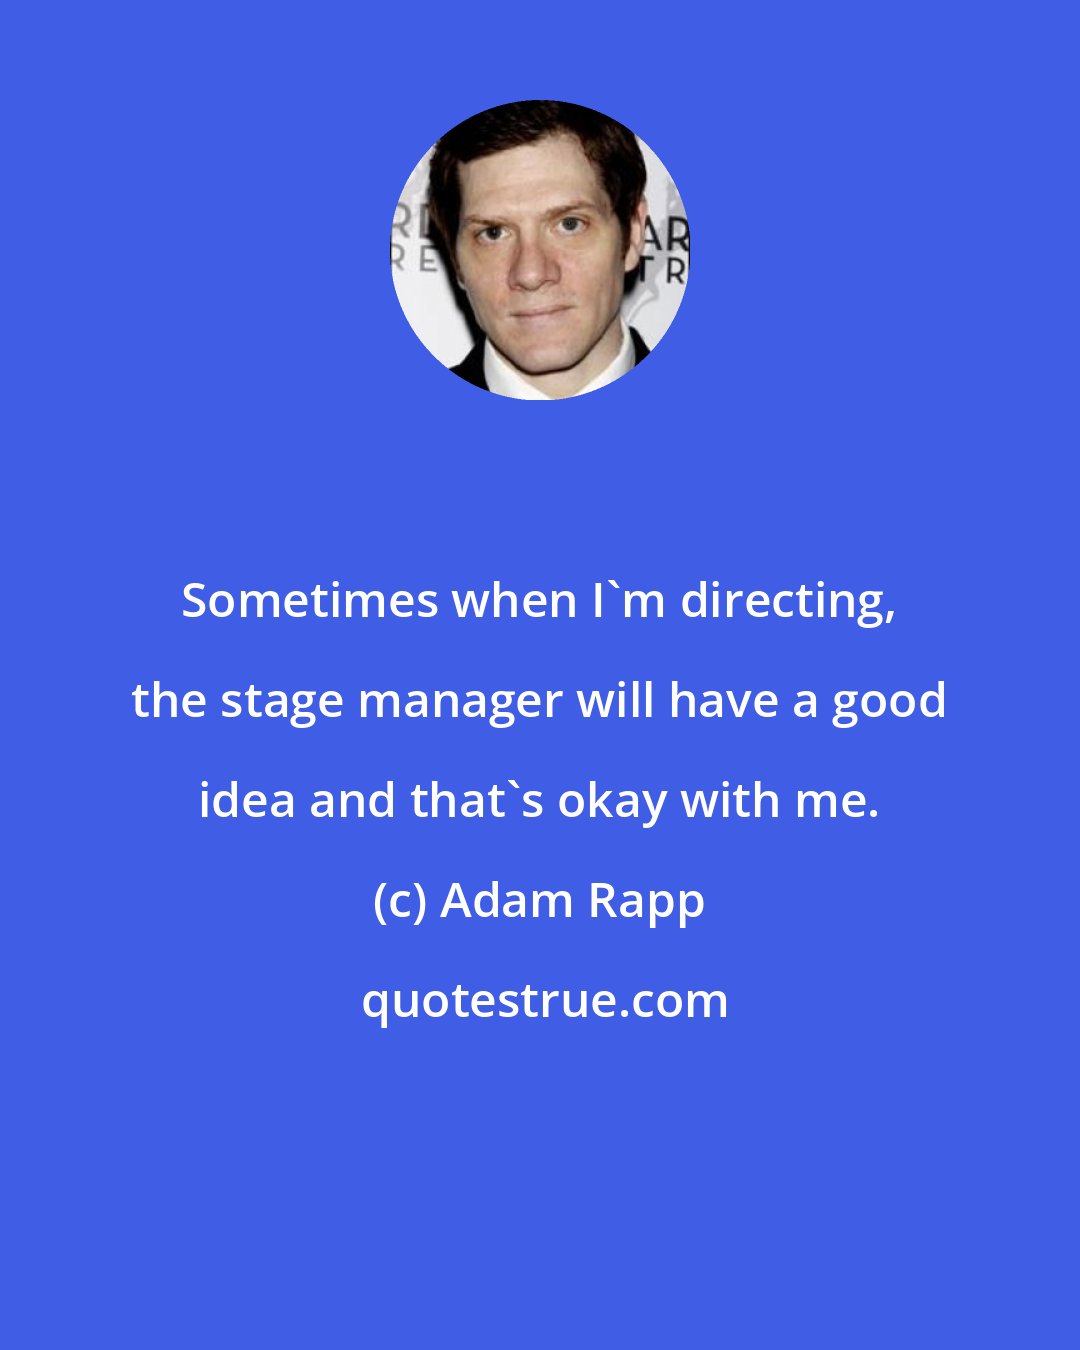 Adam Rapp: Sometimes when I'm directing, the stage manager will have a good idea and that's okay with me.